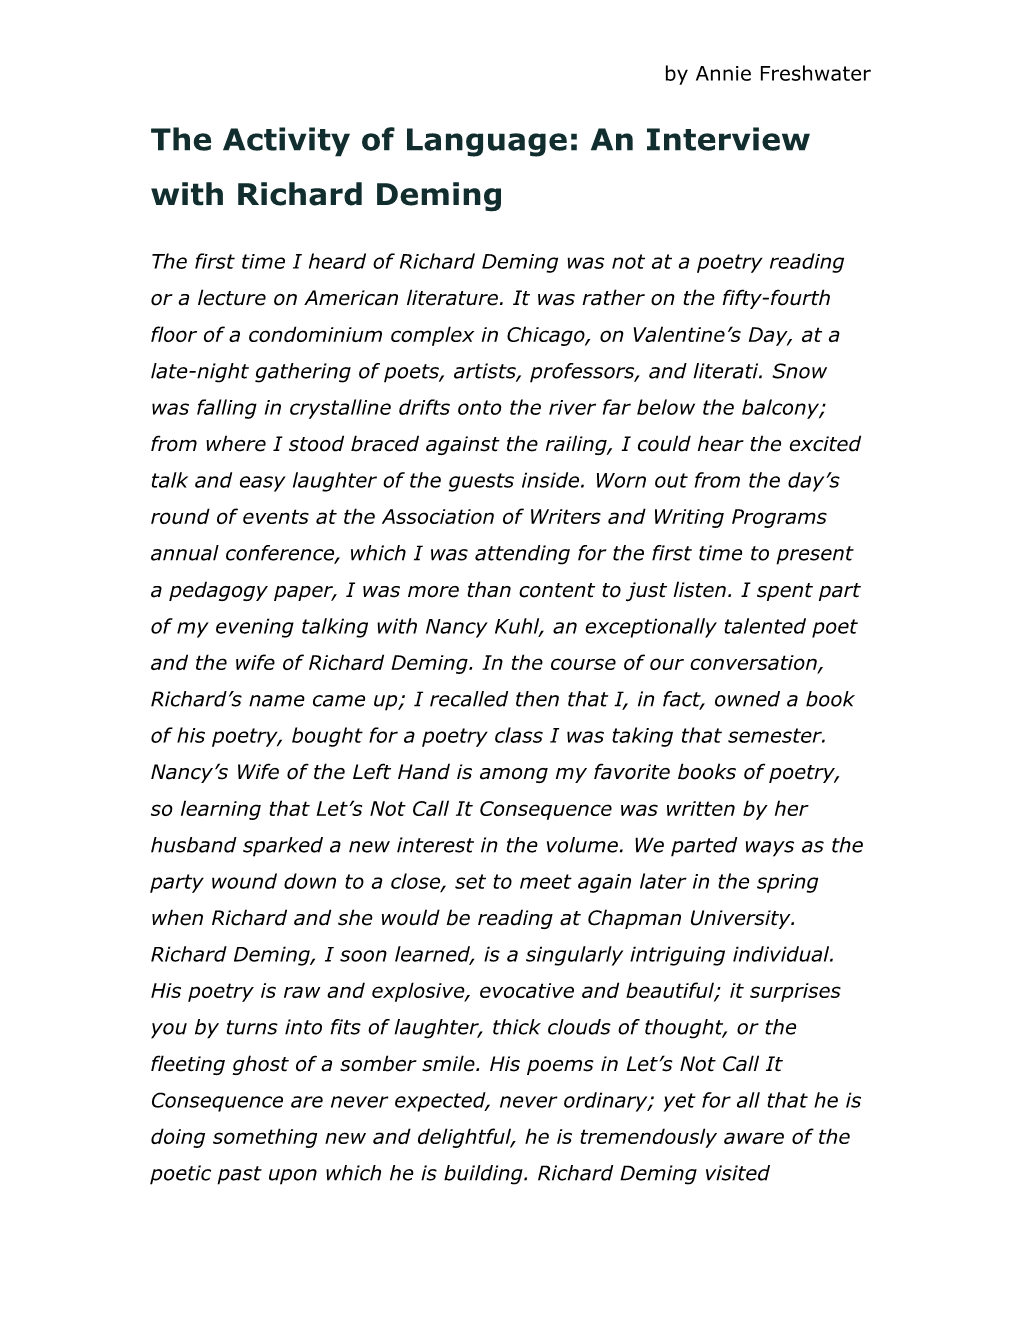 An Interview with Richard Deming